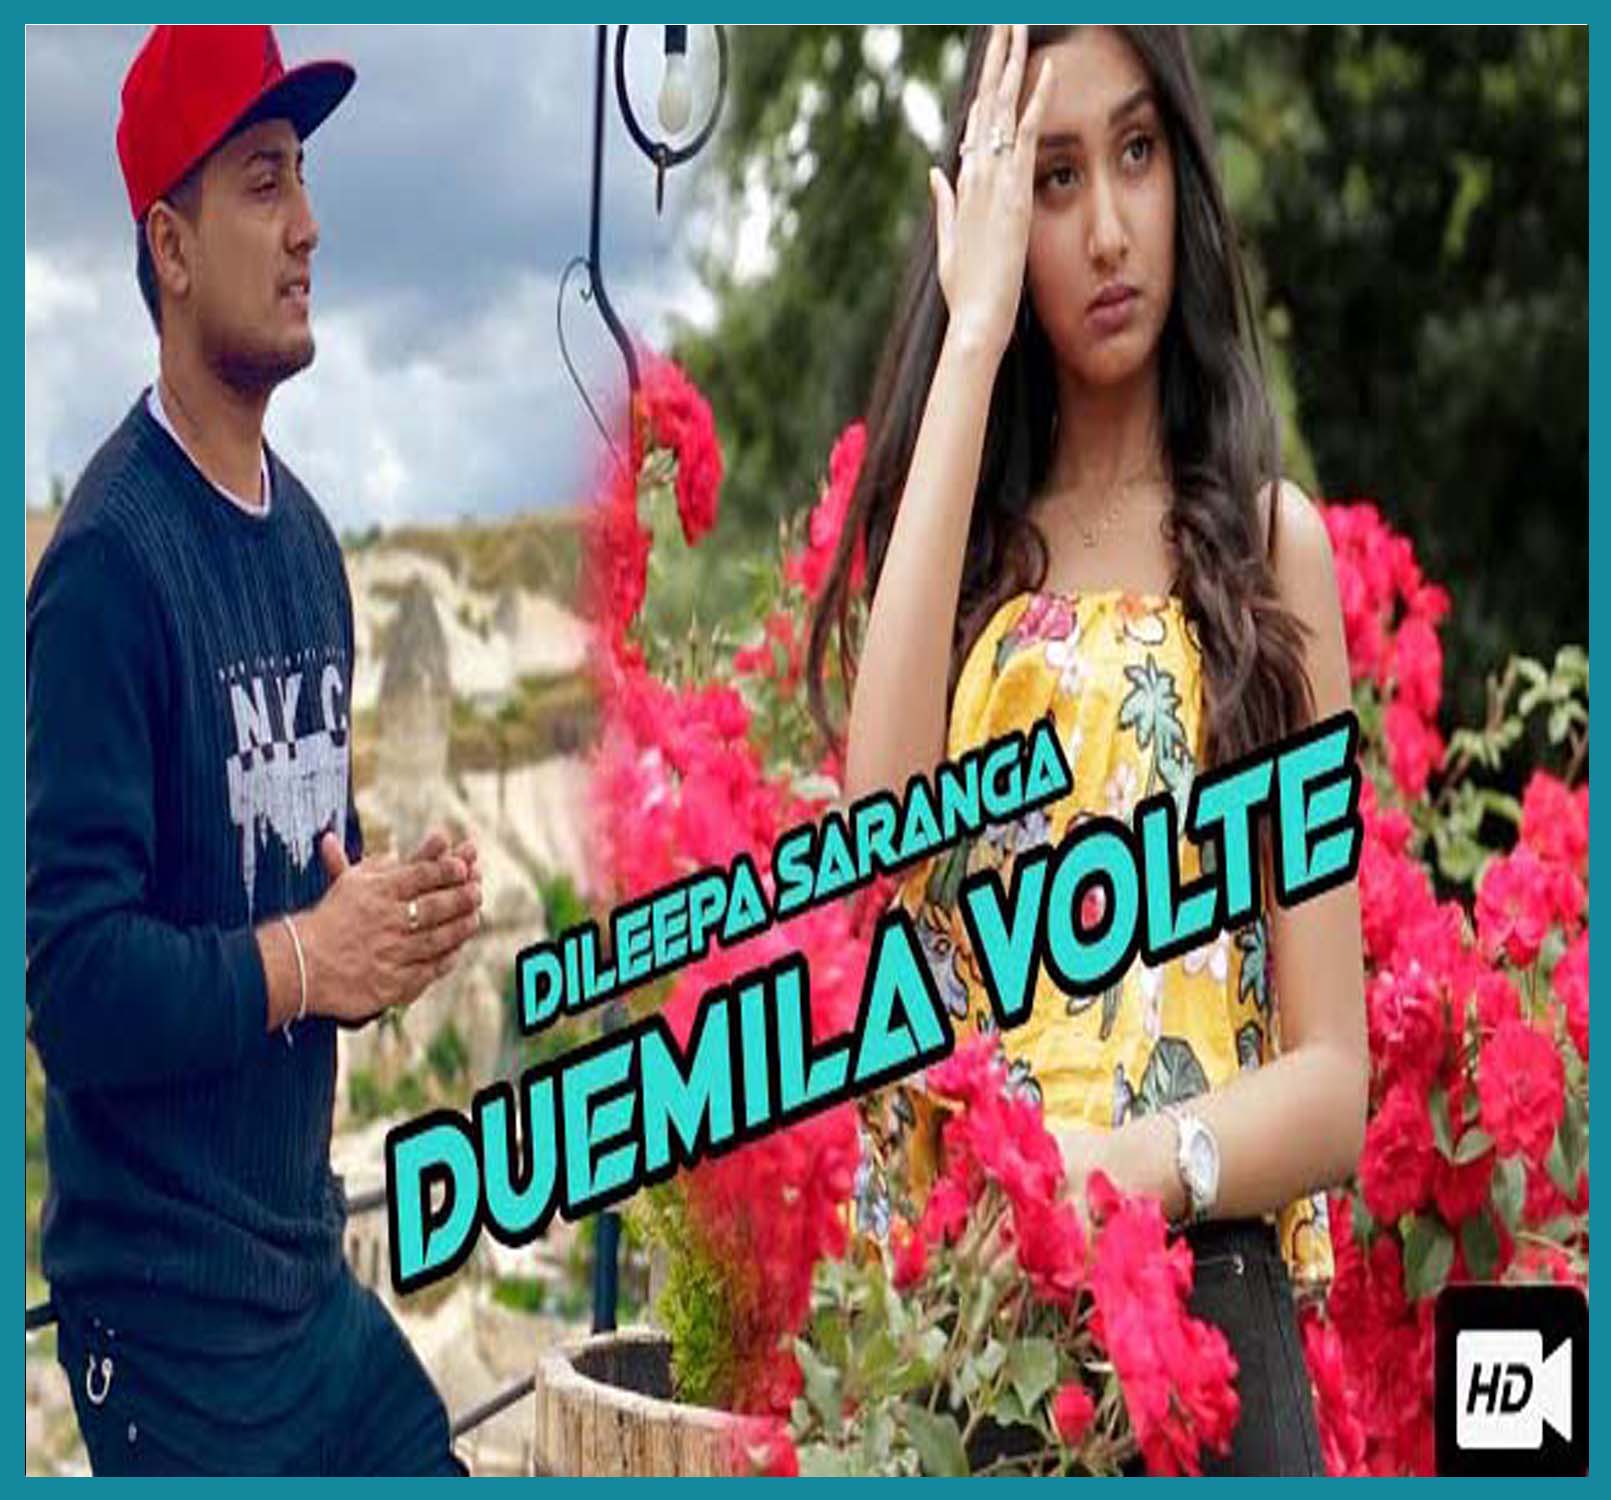 Duemila Volte Cover (New Italian Song)